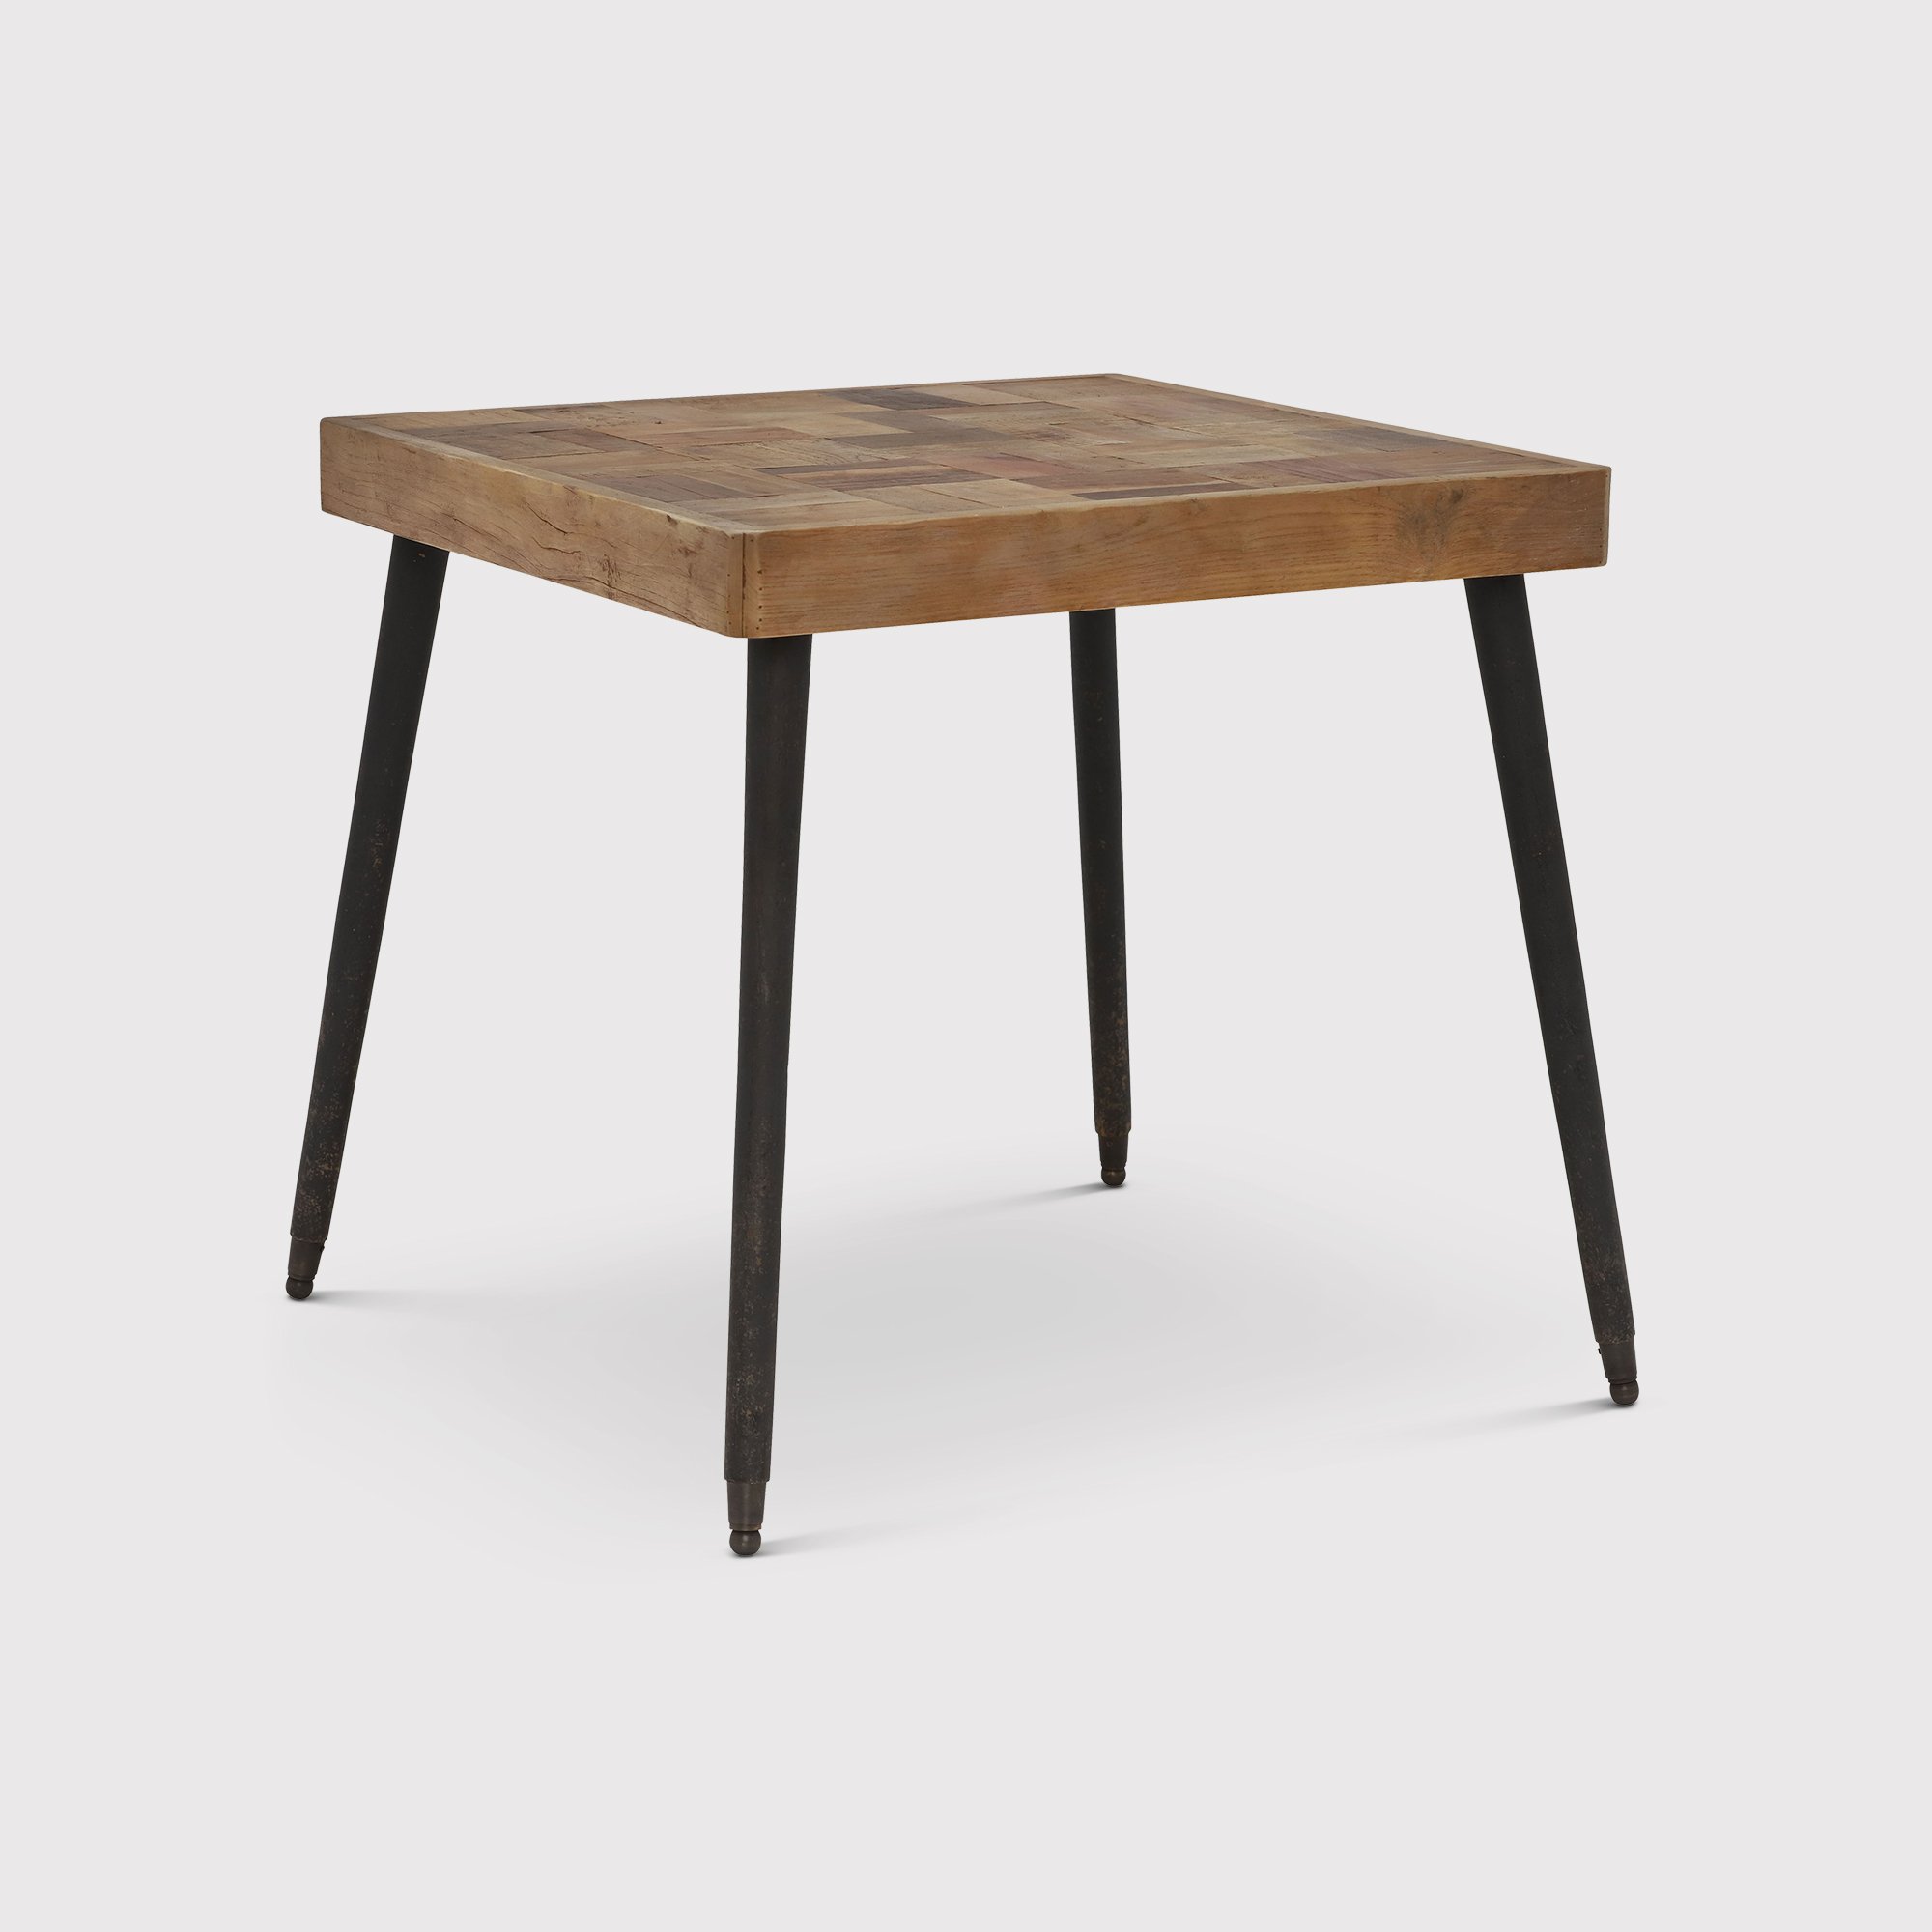 Dante Dining Table With Partuetry Inlay, Brown | Barker & Stonehouse